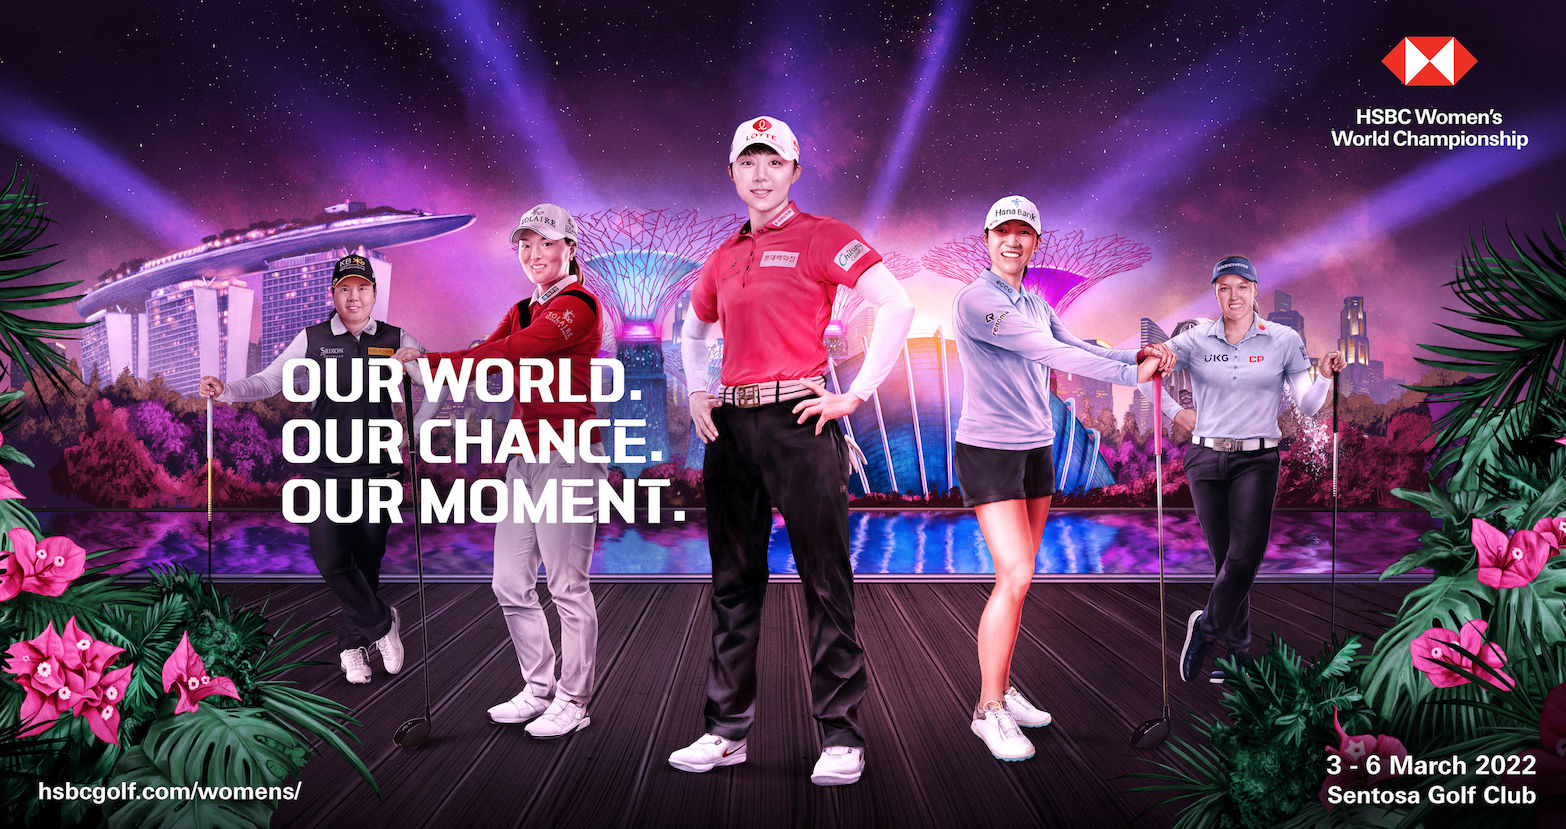 HSBC Women’s World Championship tees off this March with sustainability as its focus